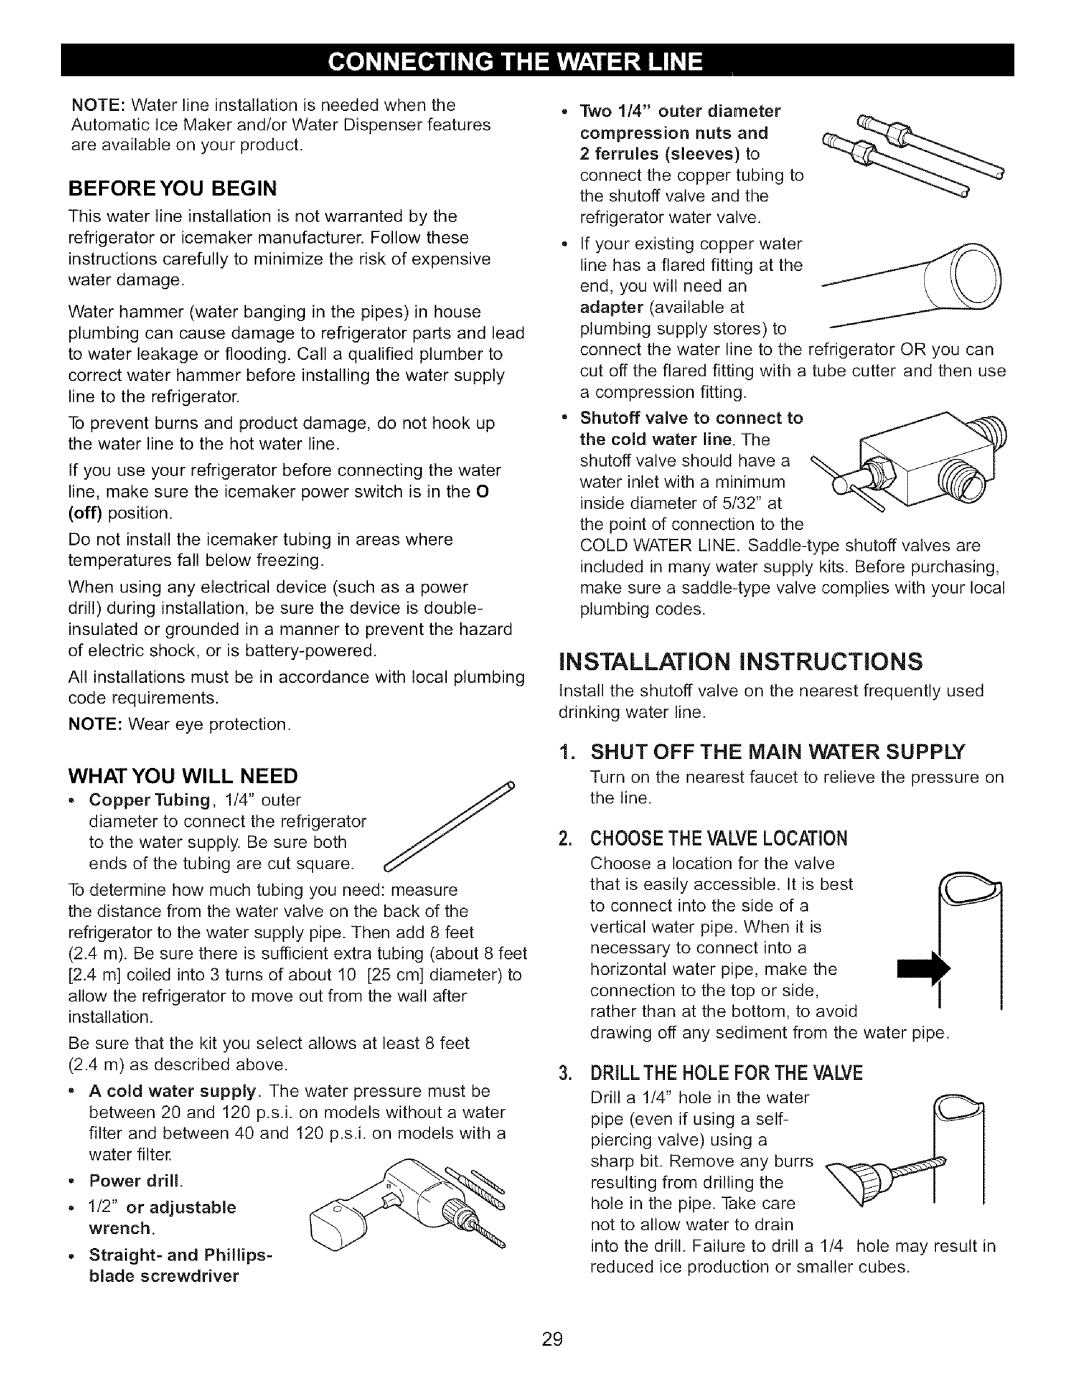 LG Electronics LFC22760 Installation Instructions, Before You Begin, What You Will Need, SHUT OFF THE MAiN WATER SUPPLY 